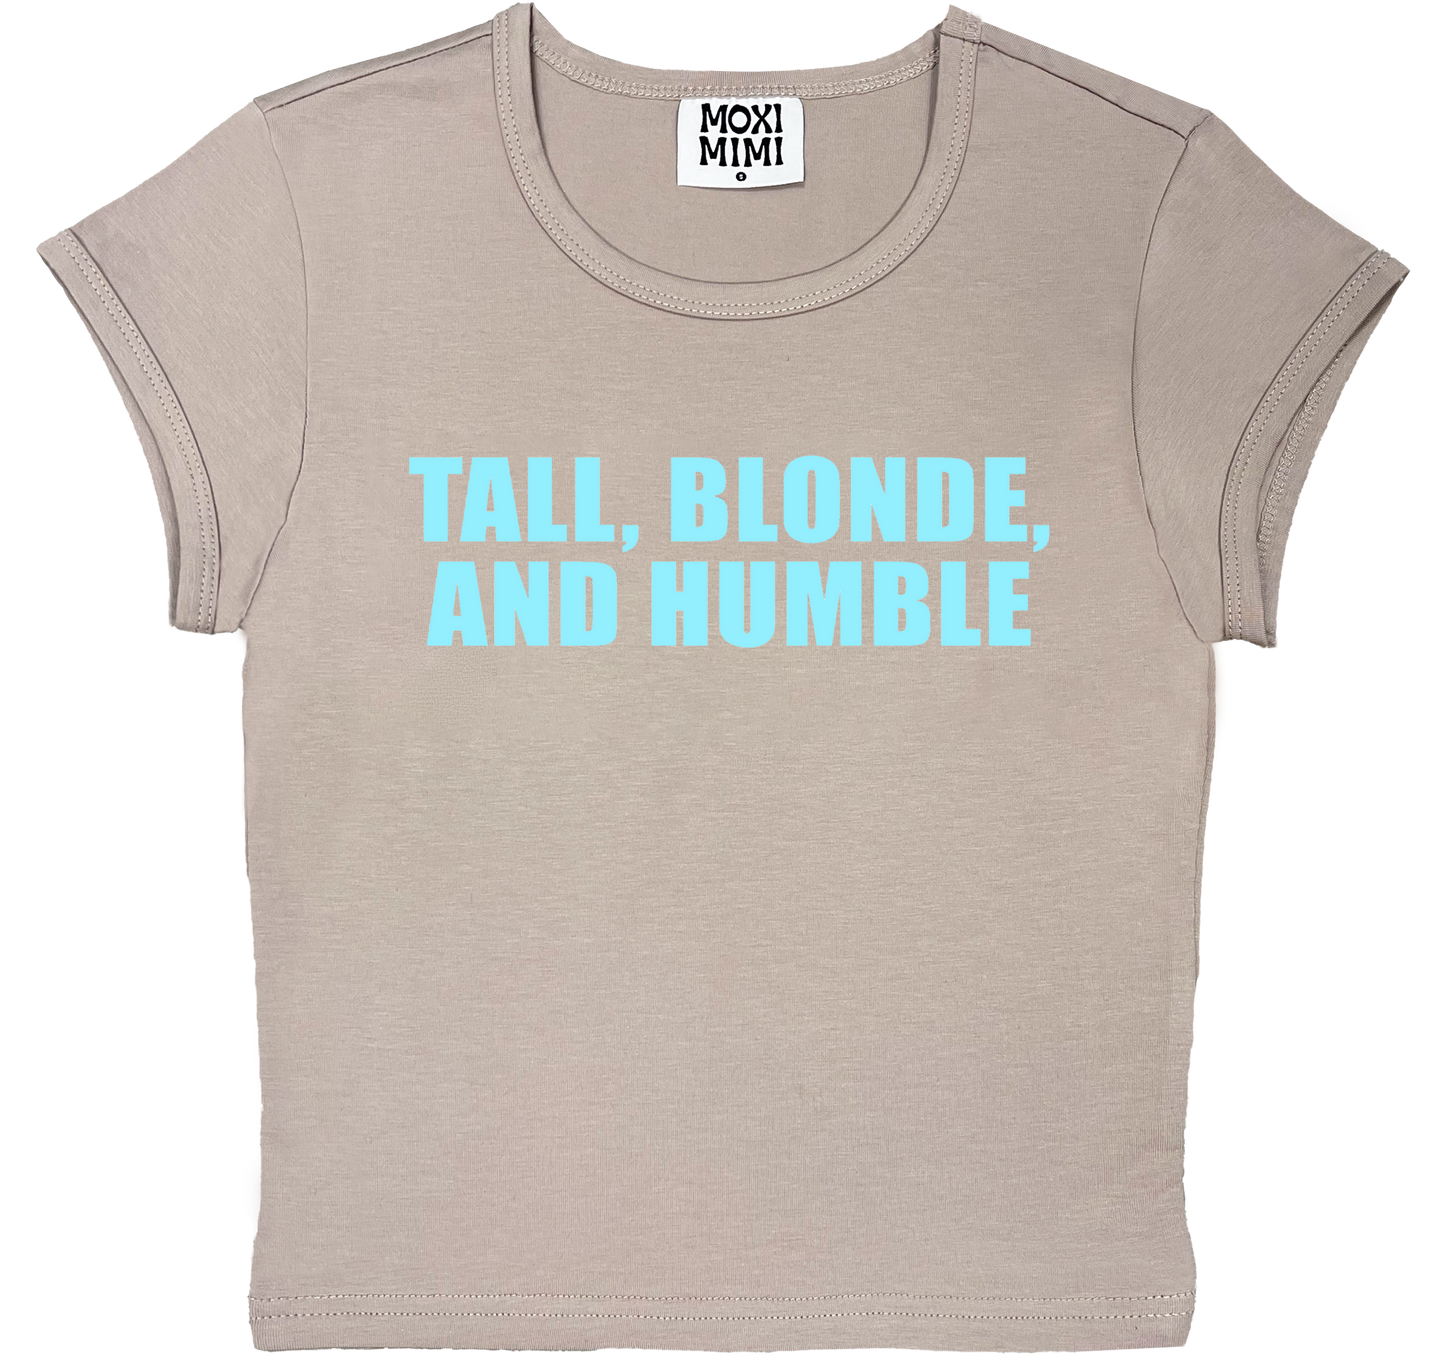 Tall, Blonde, and Humble